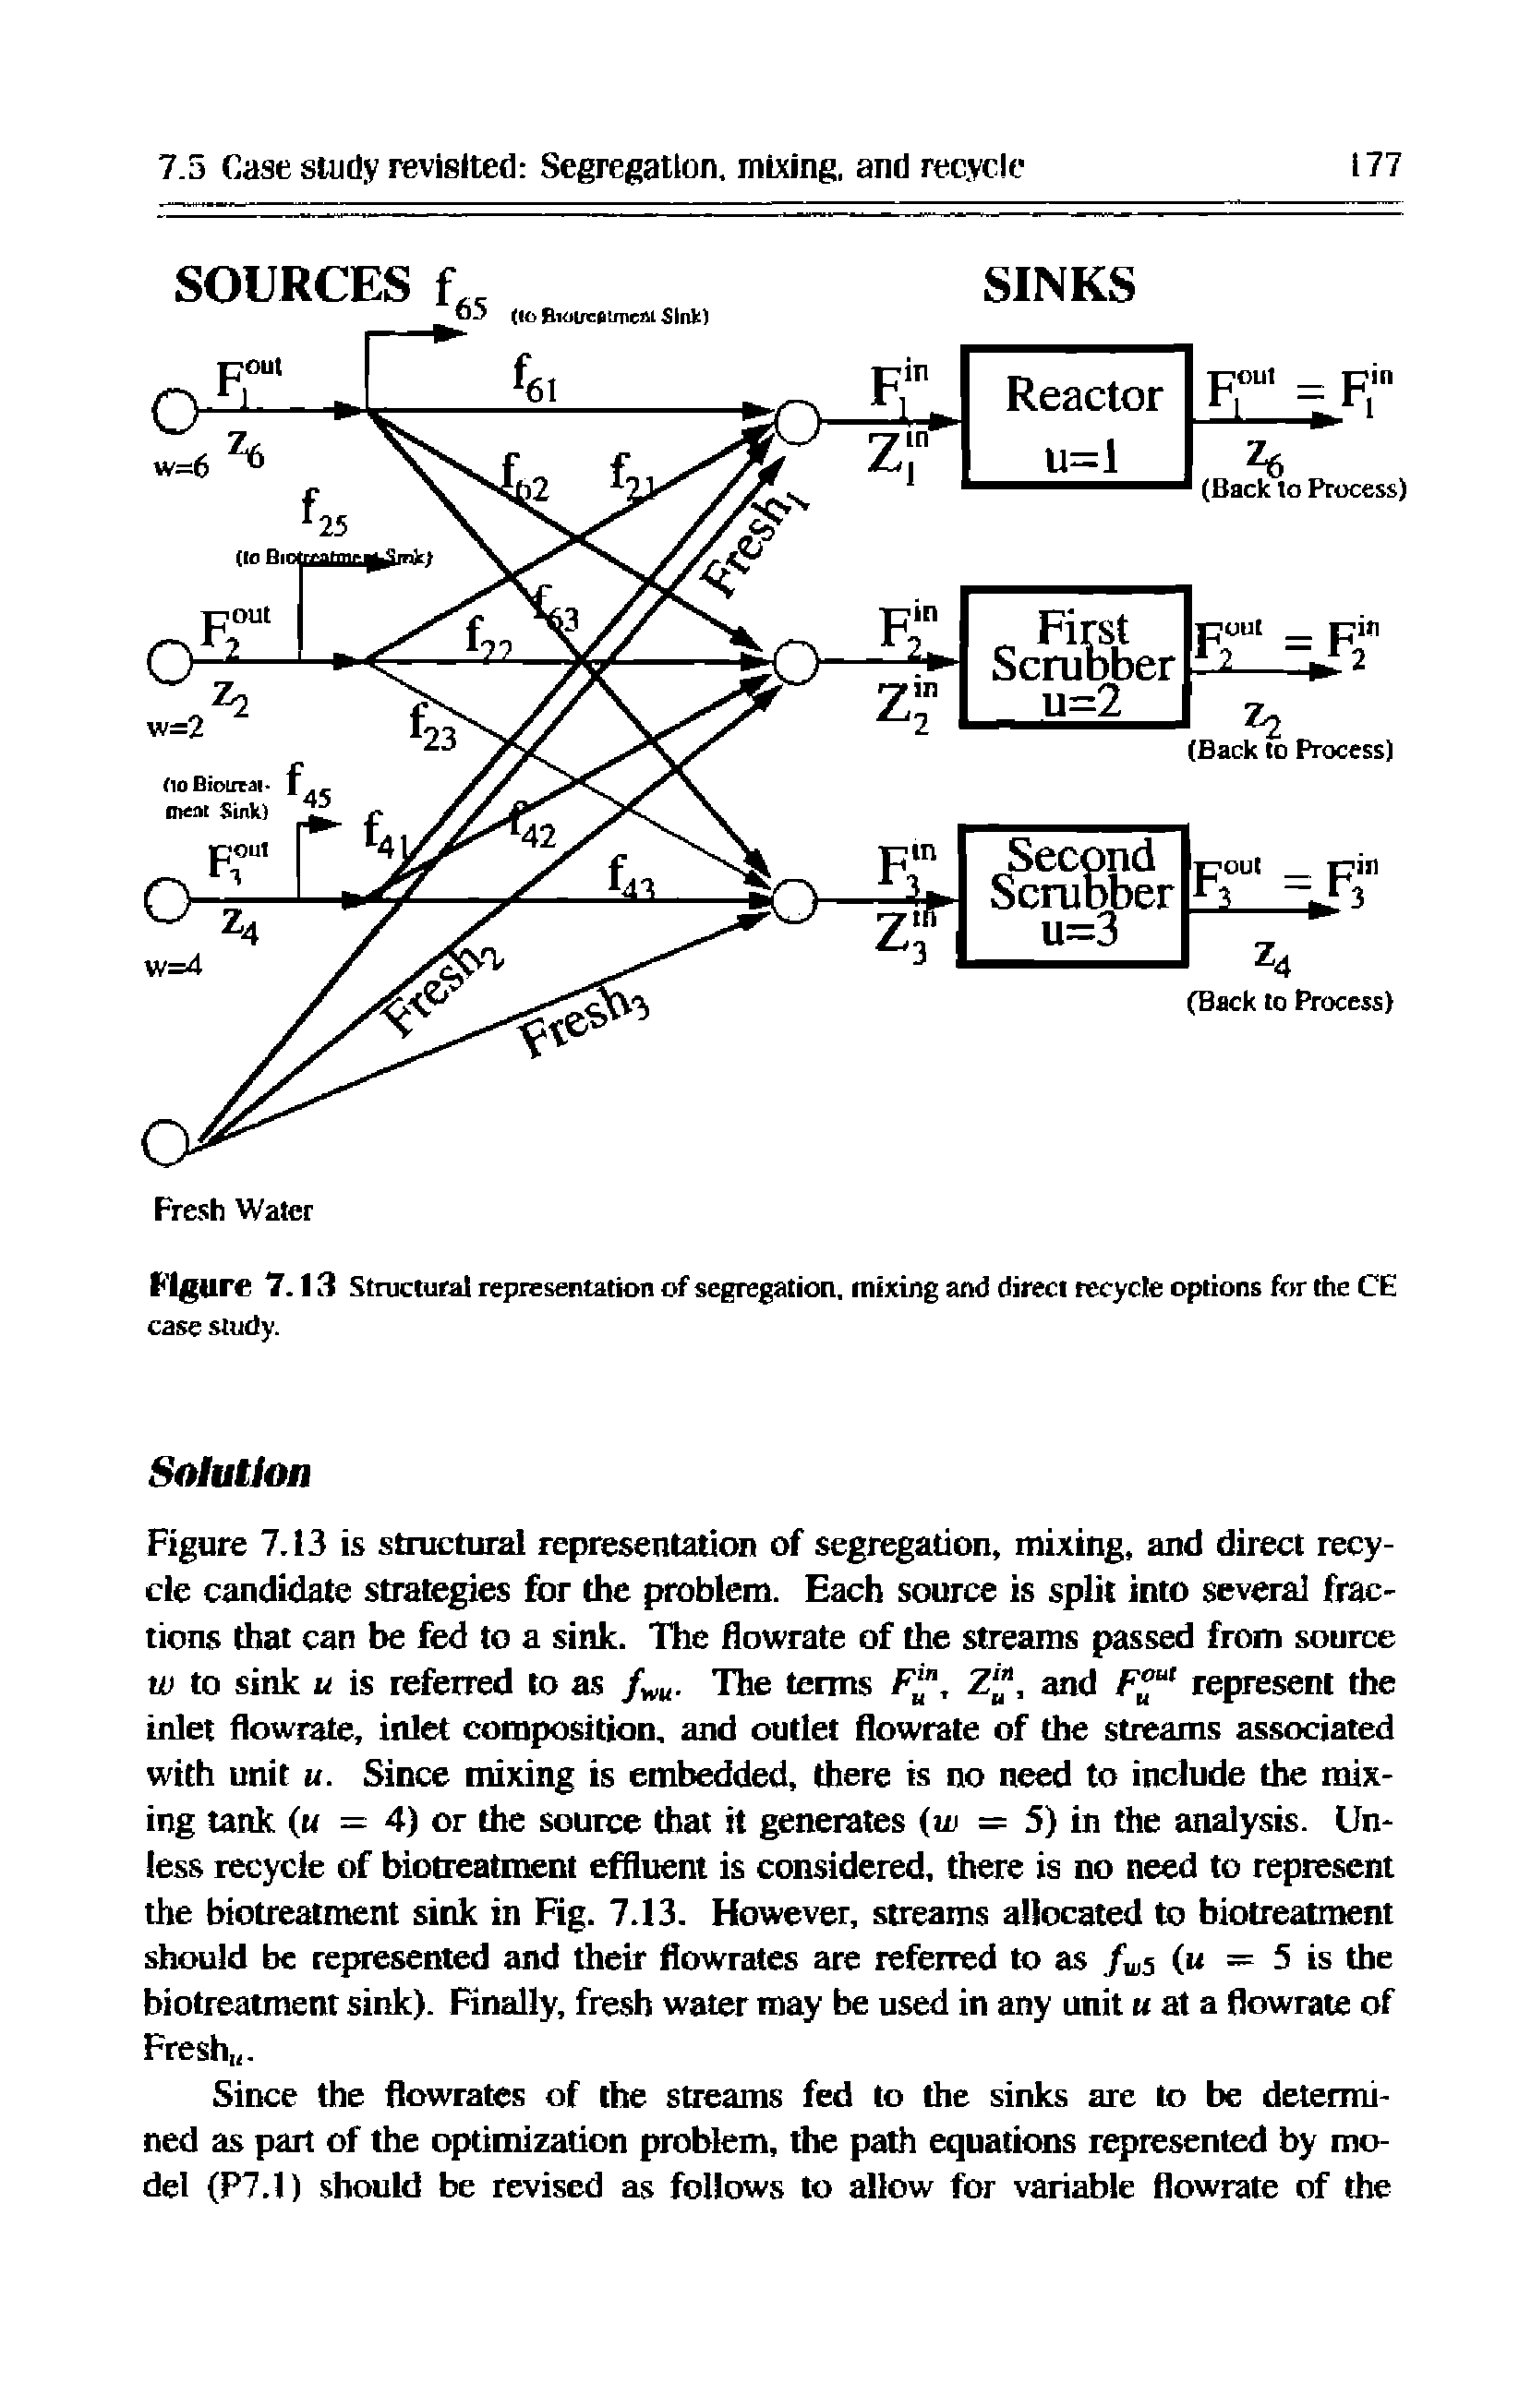 Figure 7.13 is structural representation of segregation, mixing, and direct recycle candidate strategies for the problem. Each source is split into several frac-tions that can be fed to a sink. The flowrate of the streams passed from source w to sink u is referred to as The terms F, Z", and represent the inlet flowrate, inlet composition, and outlet flowrate of the streams associated with unit u. Since mixing is embedded, there is no need to include the mixing tank (m = 4) or the source that it generates u> = 5) in the analysis. Unless recycle of biotreatment effluent is considered, there is no need to represent the biotreatment sink in Fig. 7.13. However, streams allocated to biotreatment should be represented and their flowrates are referred to as (m = 5 is the biotreatment sink). Finally, fresh water may be used in any unit at a flowrate of Fresh,.